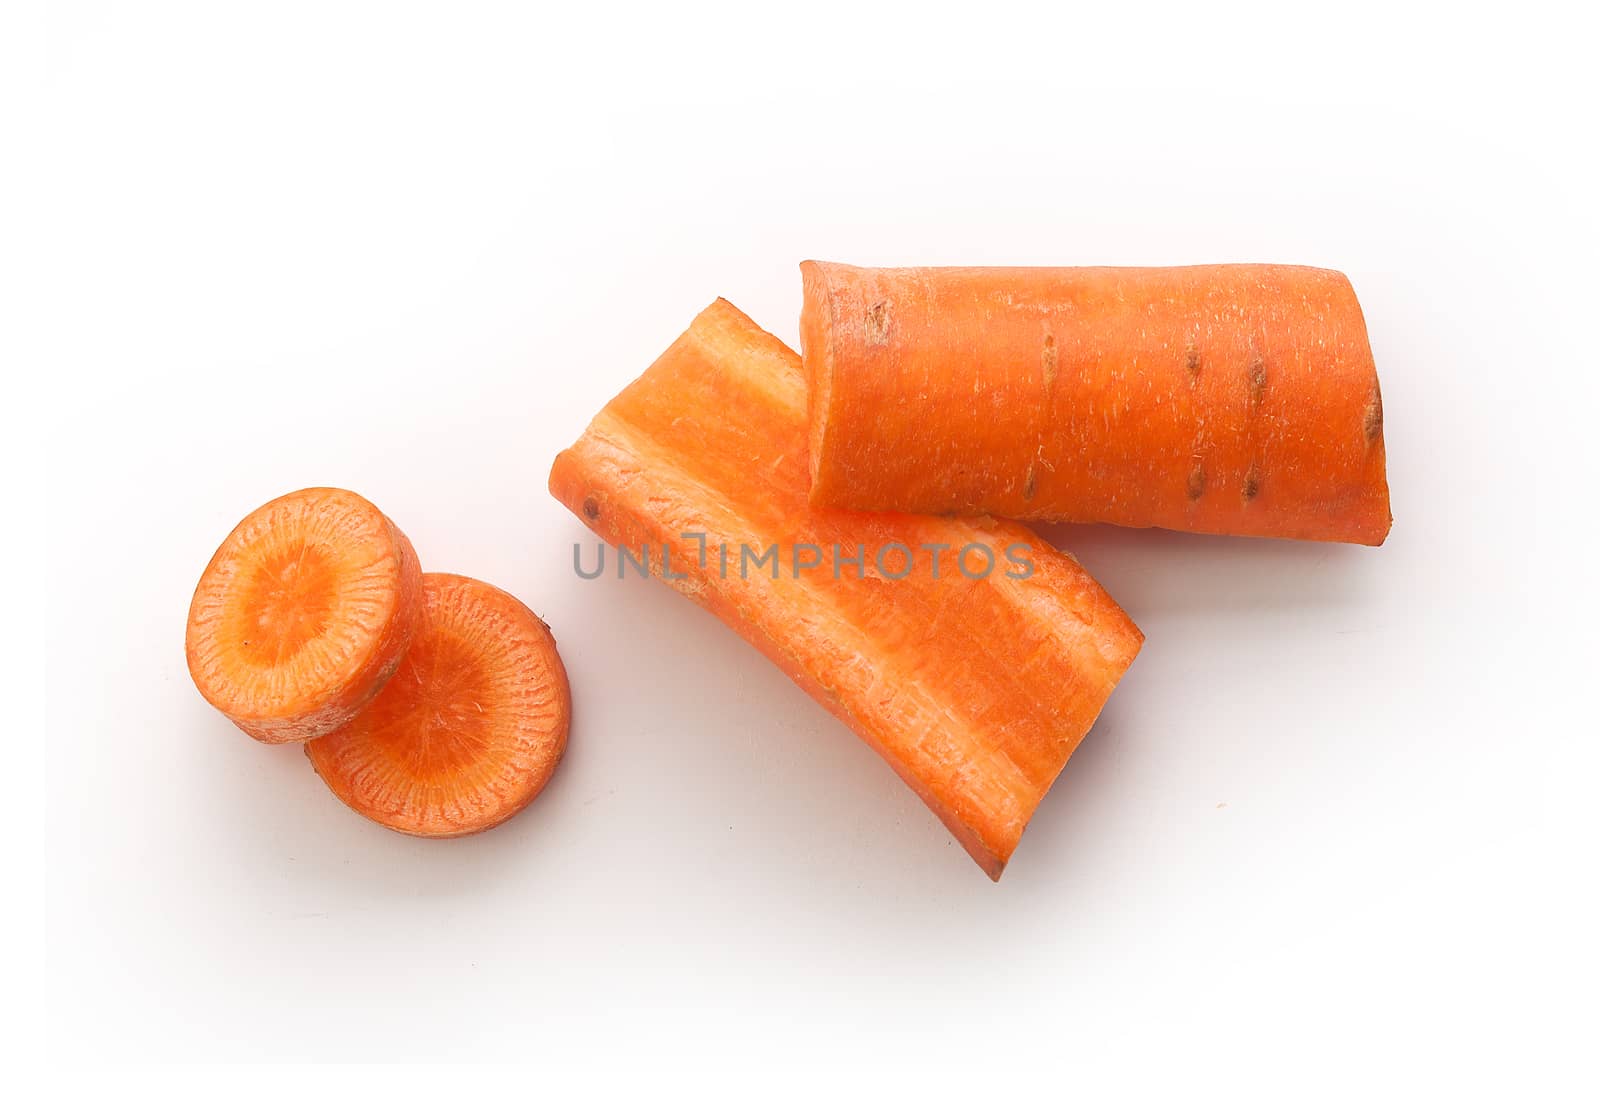 Pieces of carrot by Angorius